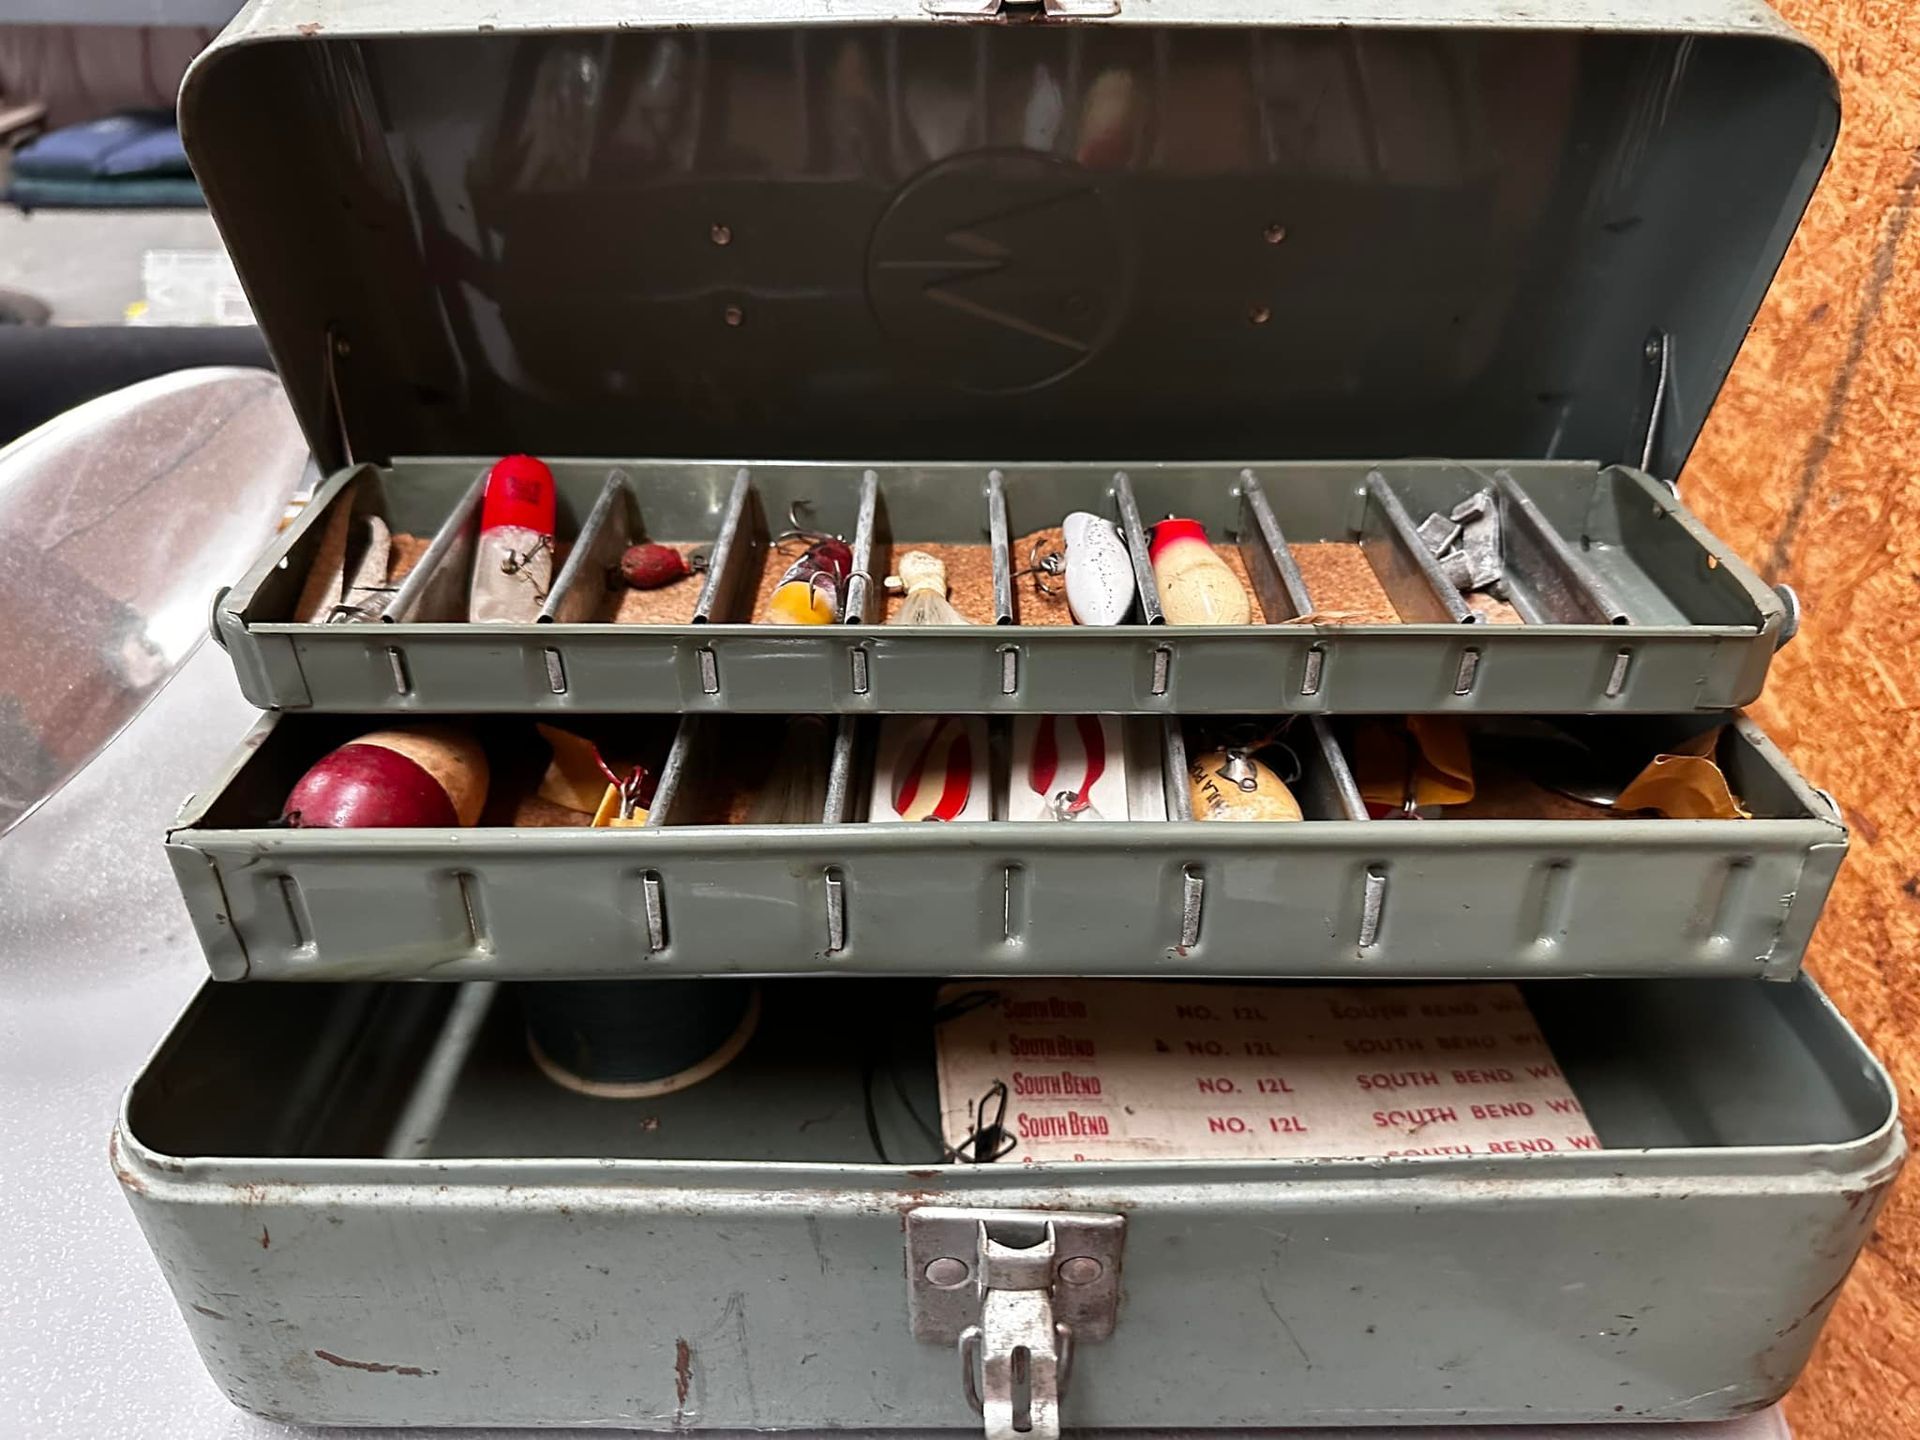 a fishing tackle box filled with fishing lures and hooks